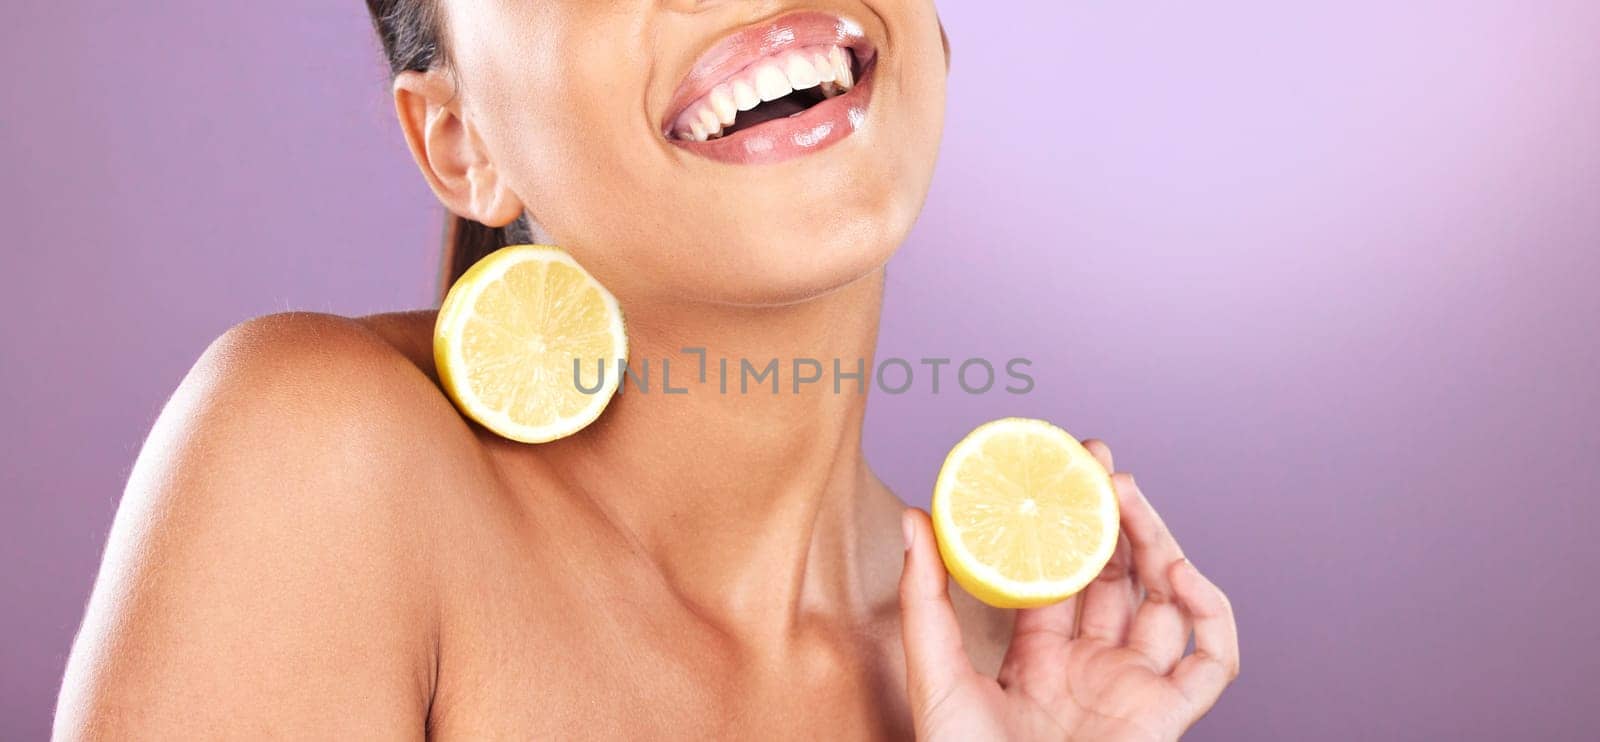 Woman, face skincare or lemon product on purple studio background for organic dermatology, healthcare diet wellness or self care grooming. Zoom, smile or happy beauty model and fruit facial cosmetics by YuriArcurs